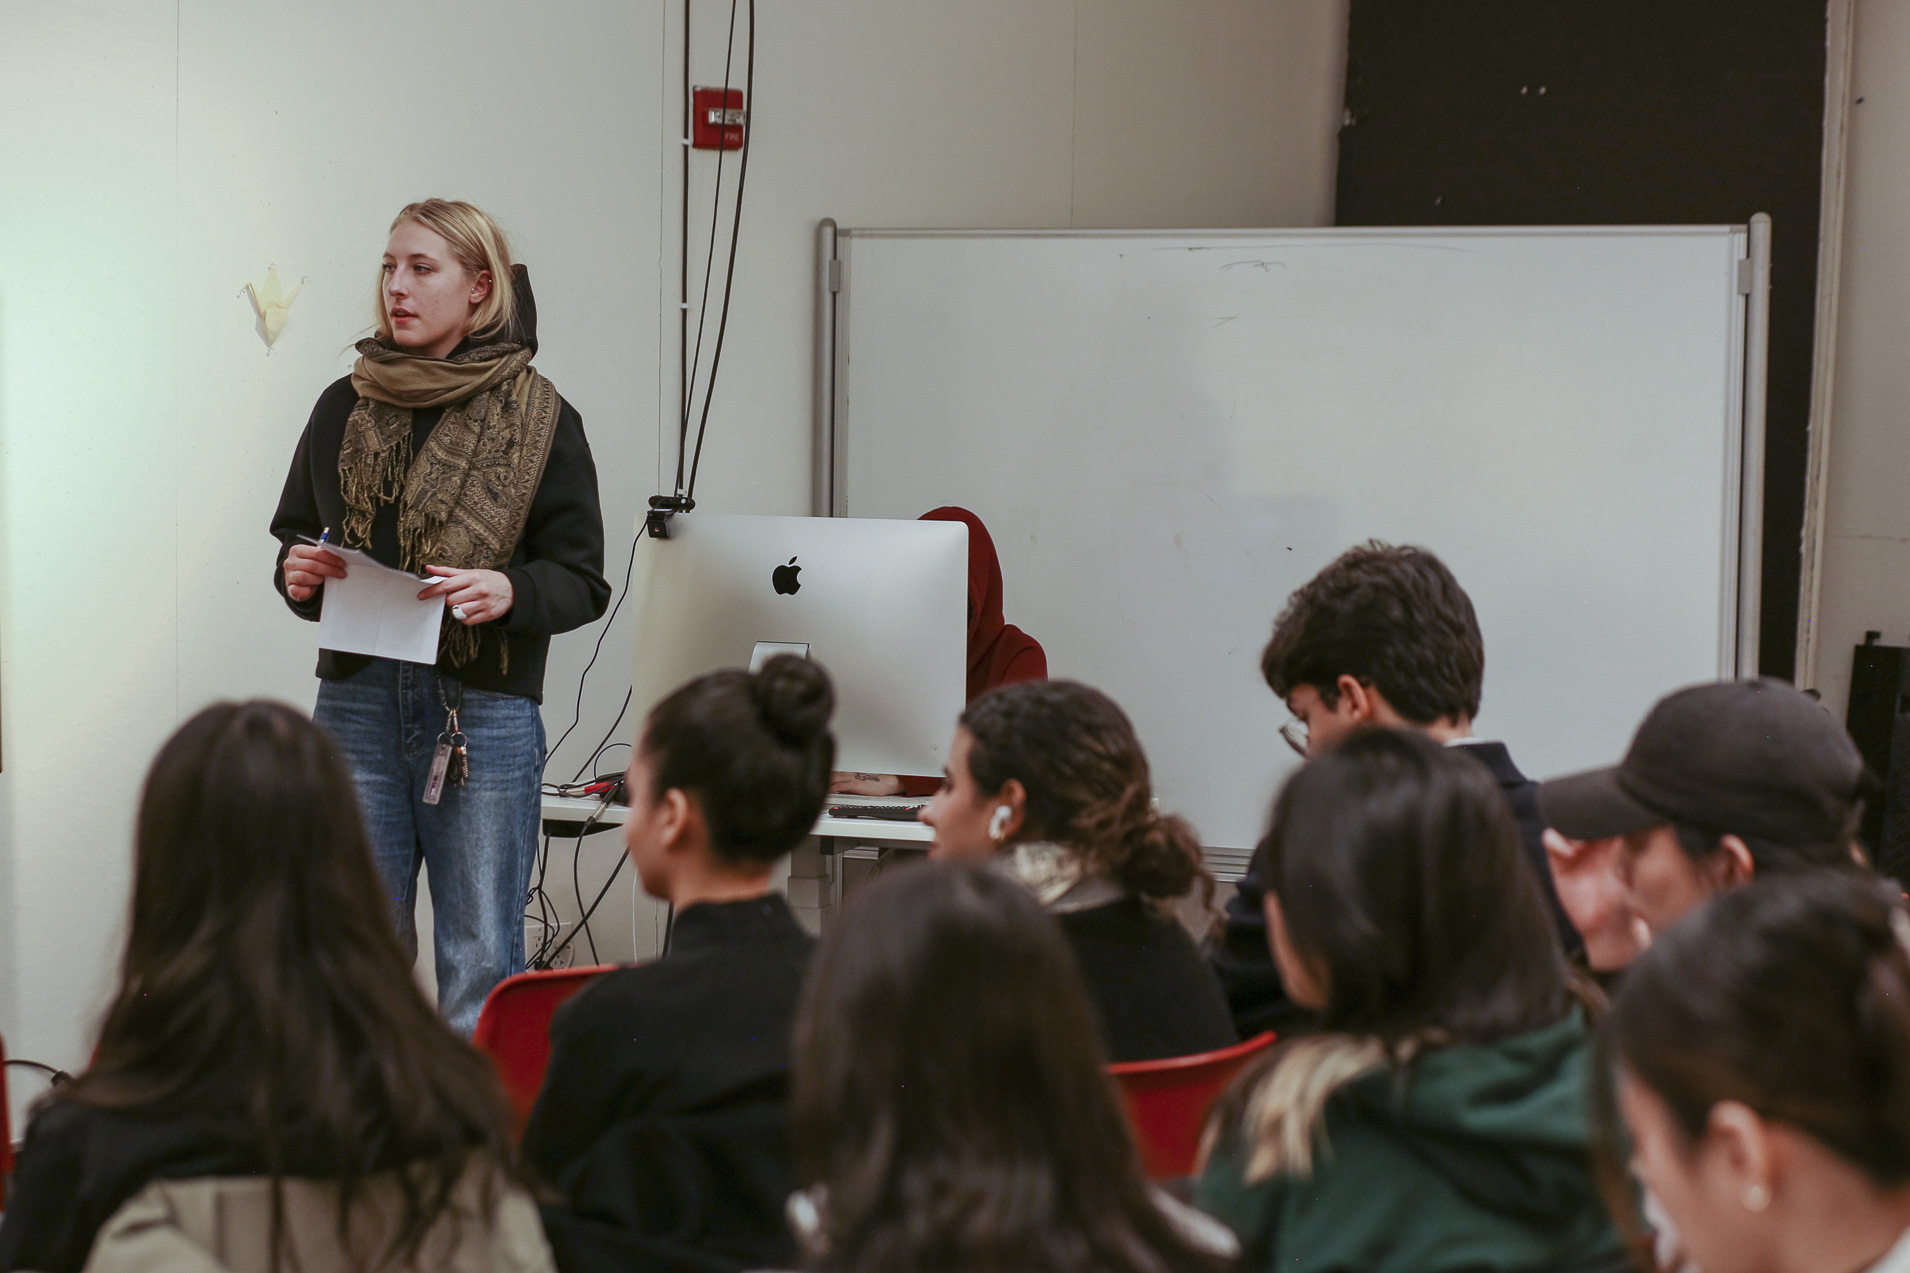 Student Cora Rafe (standing) holds an object while students are seated nearby